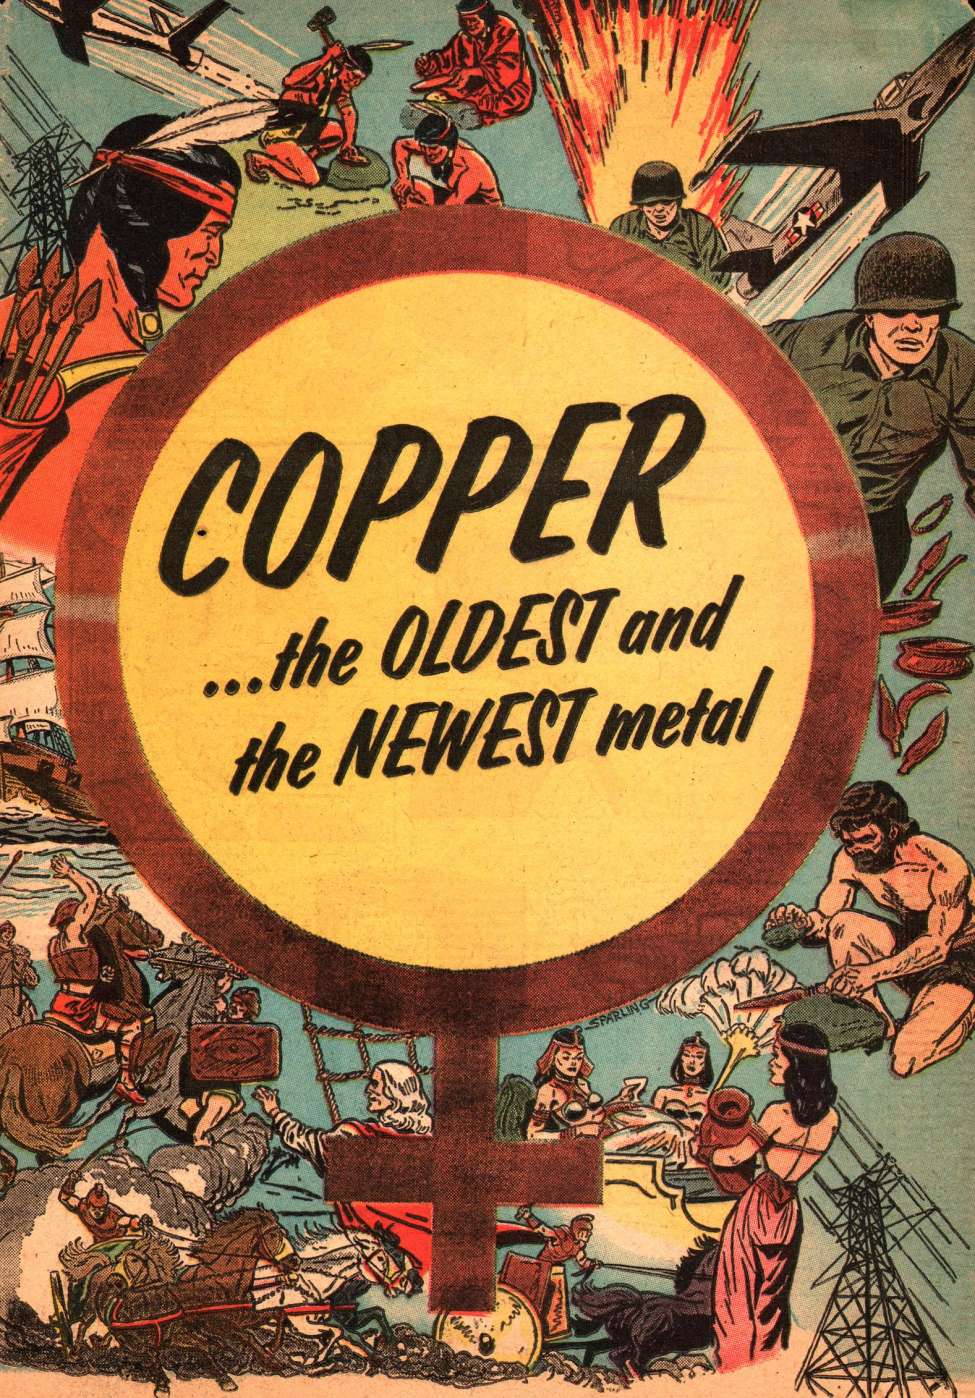 Book Cover For Copper... The Oldest and the Newest Metal